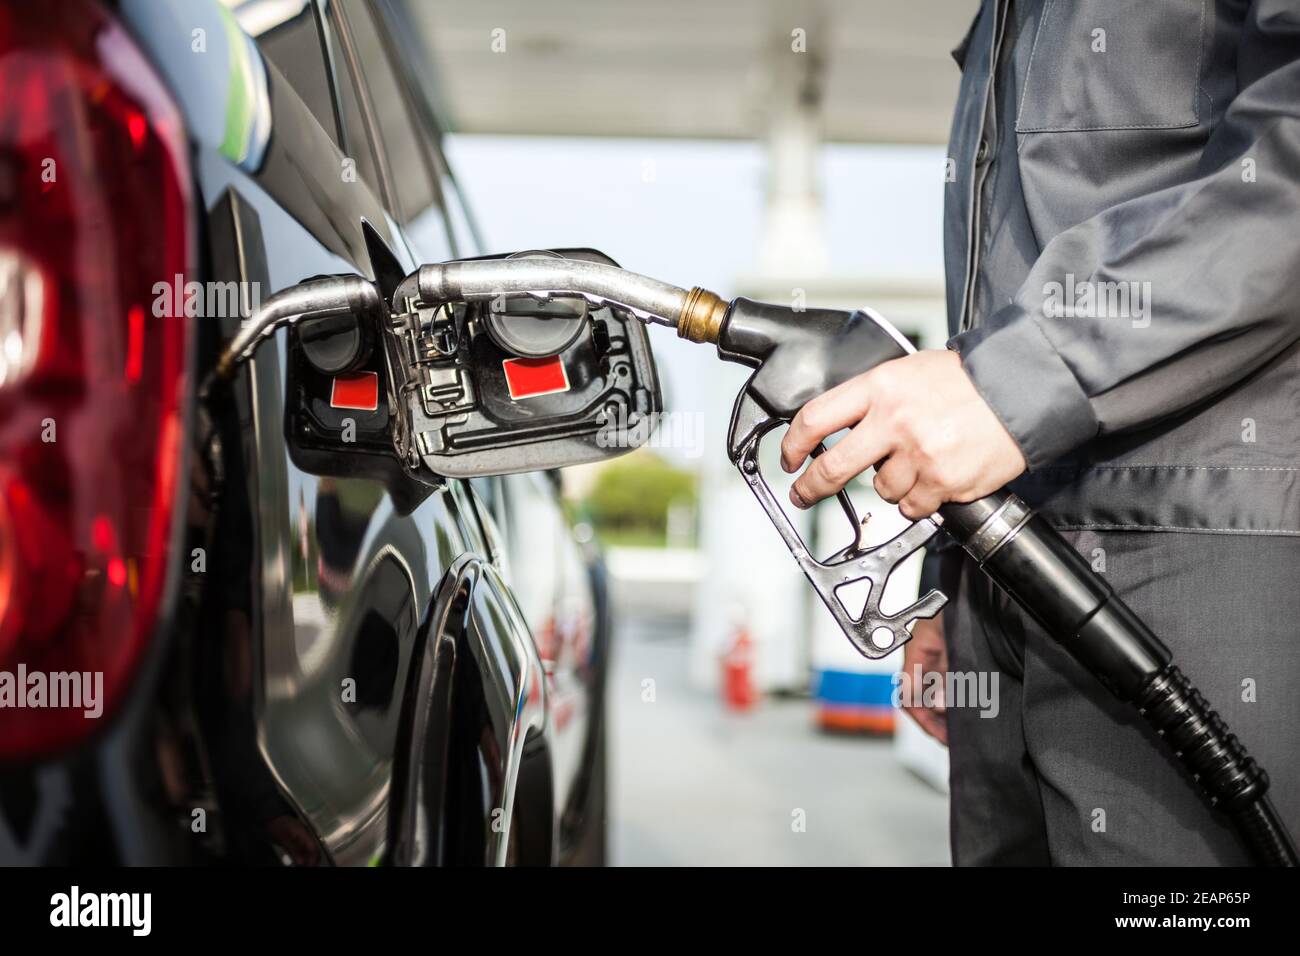 Man fueling up a car Stock Photo